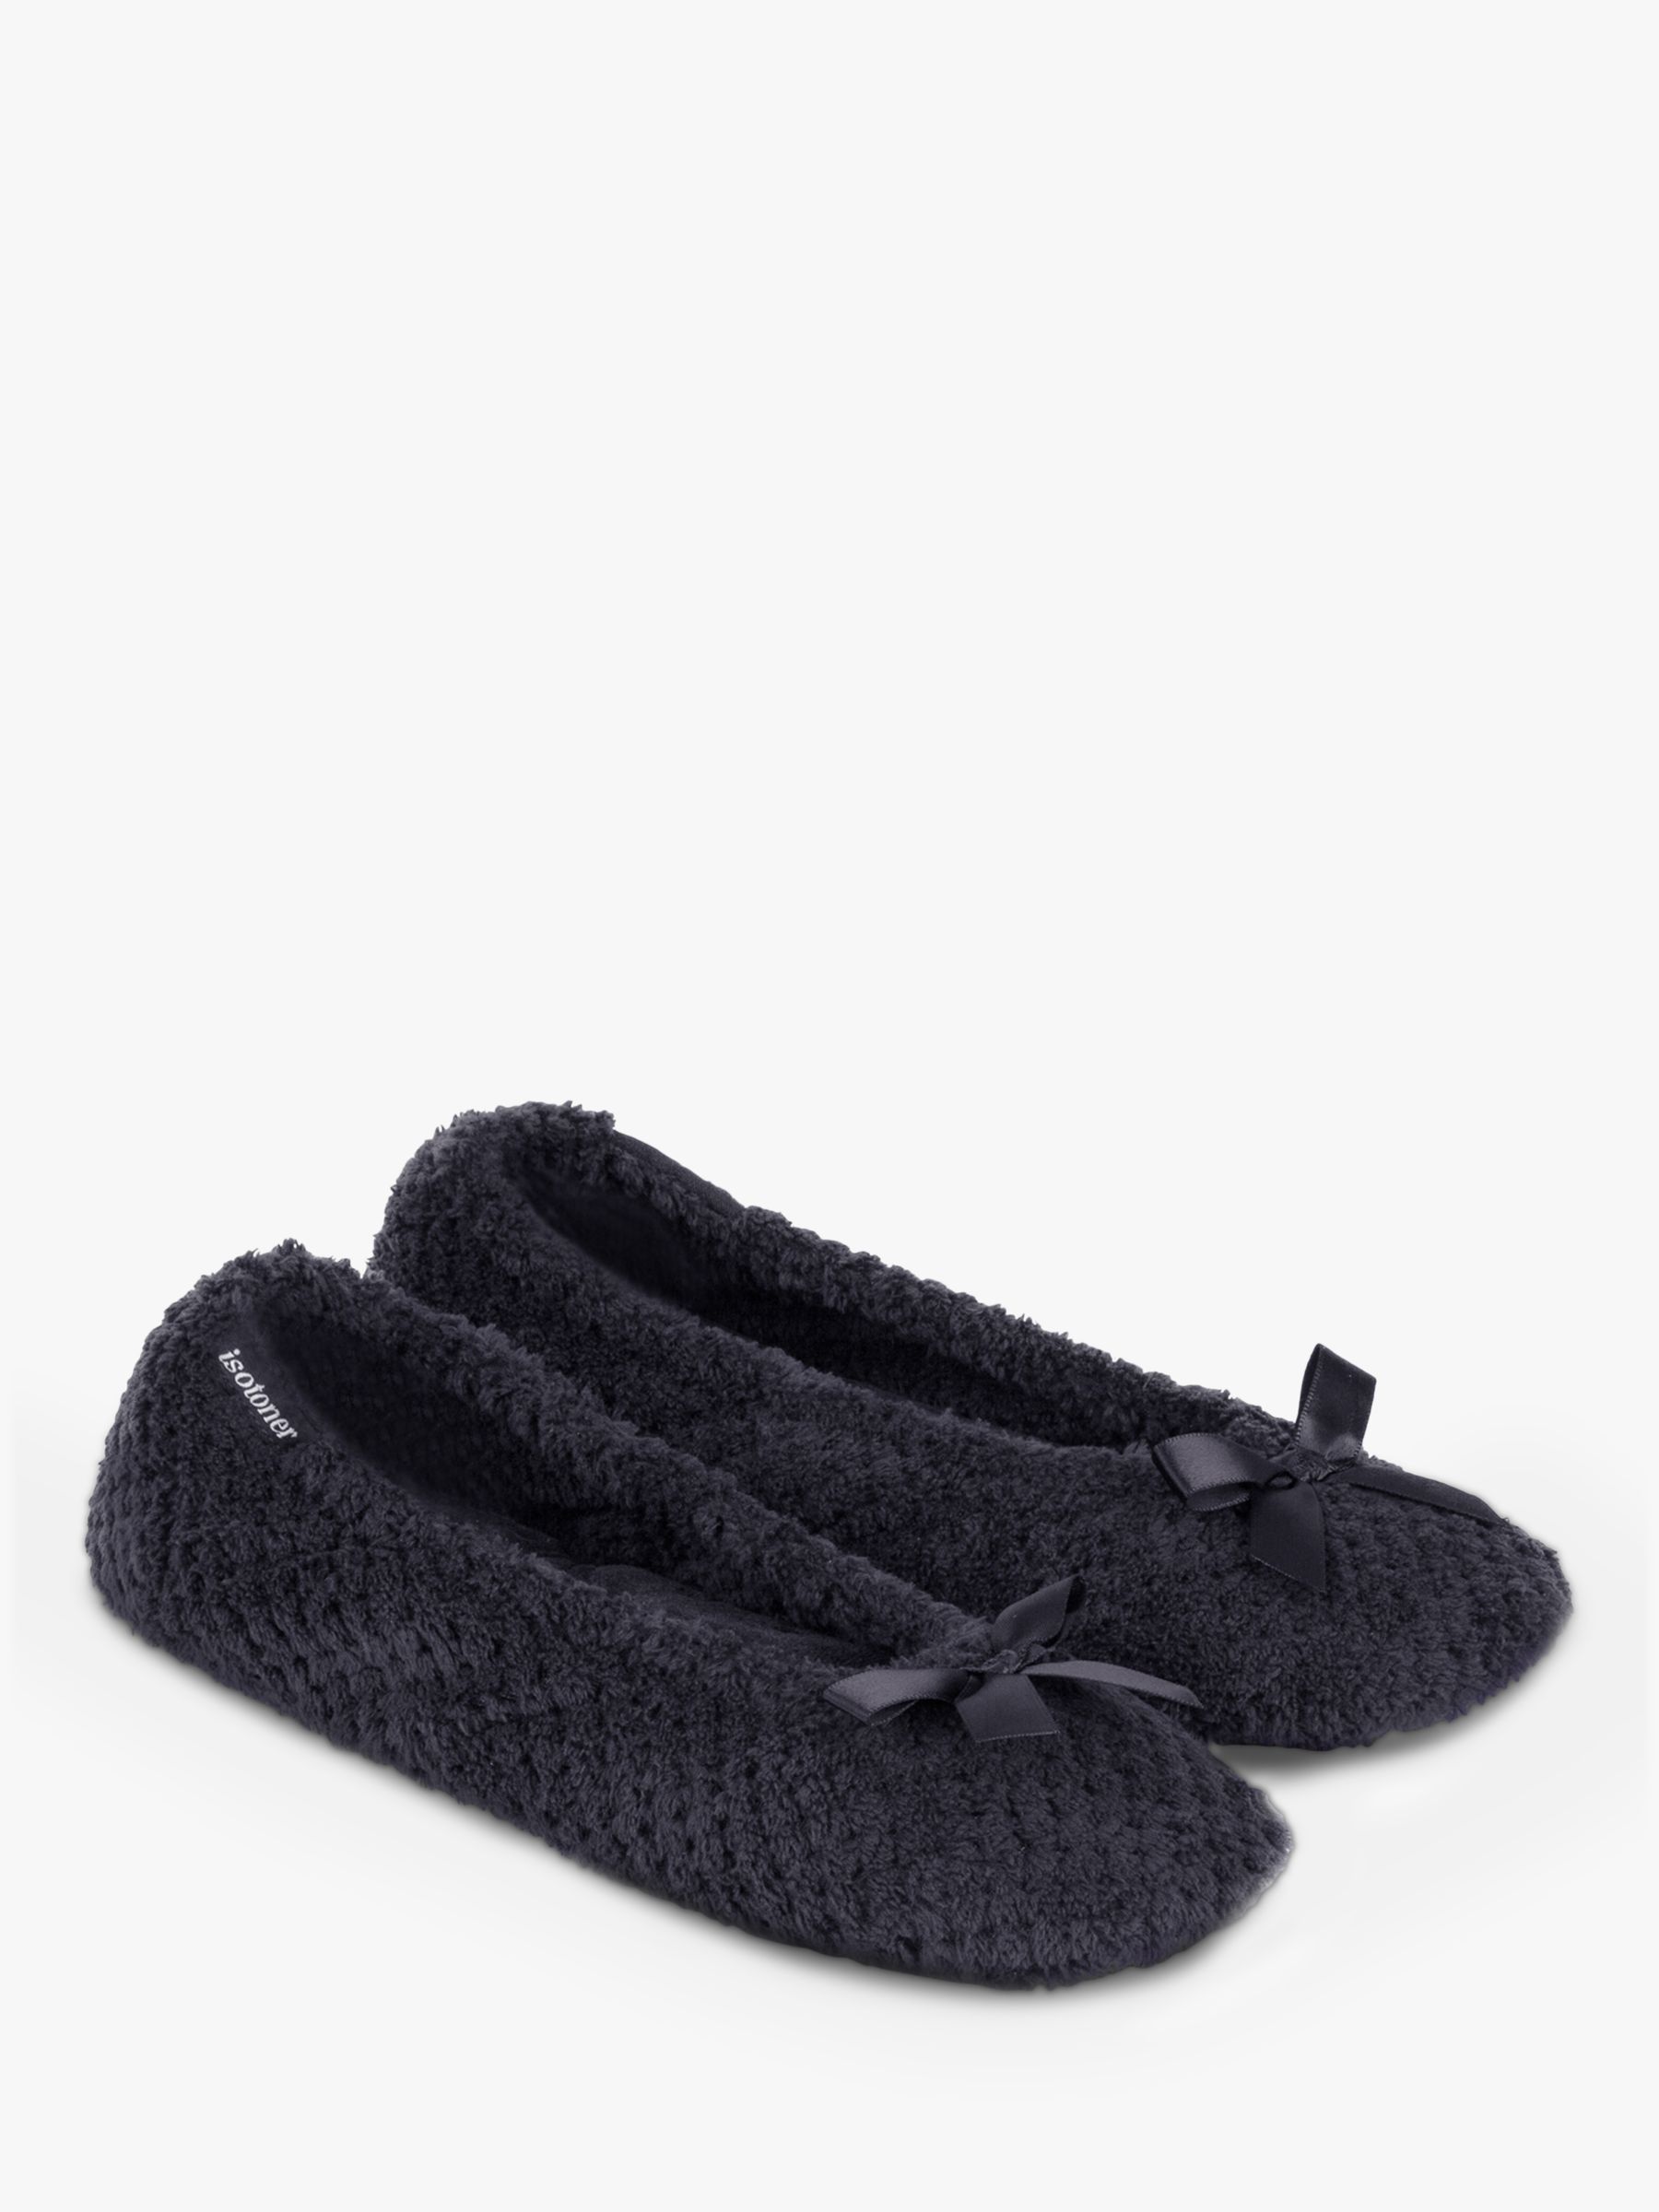 totes Terry Popcorn Ballet Slippers, Black at John Lewis & Partners